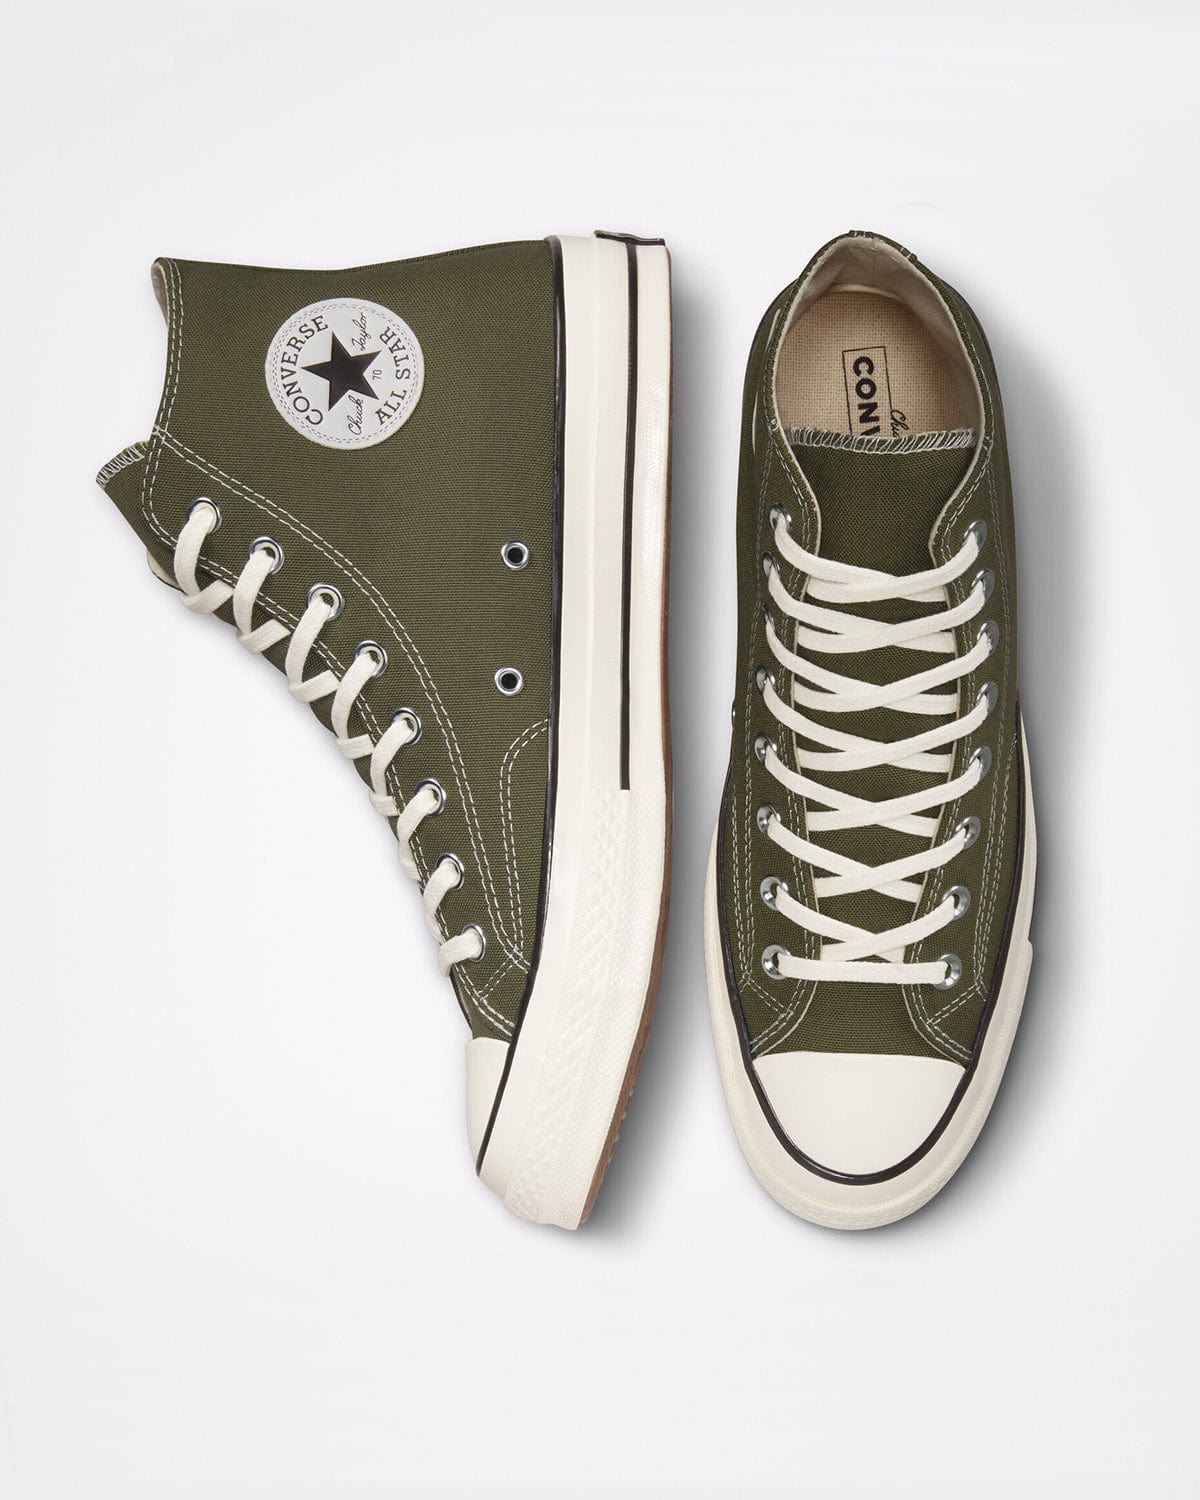 Converse Chuck 70 Hi Utility Green Shoes Sneakers Unisex